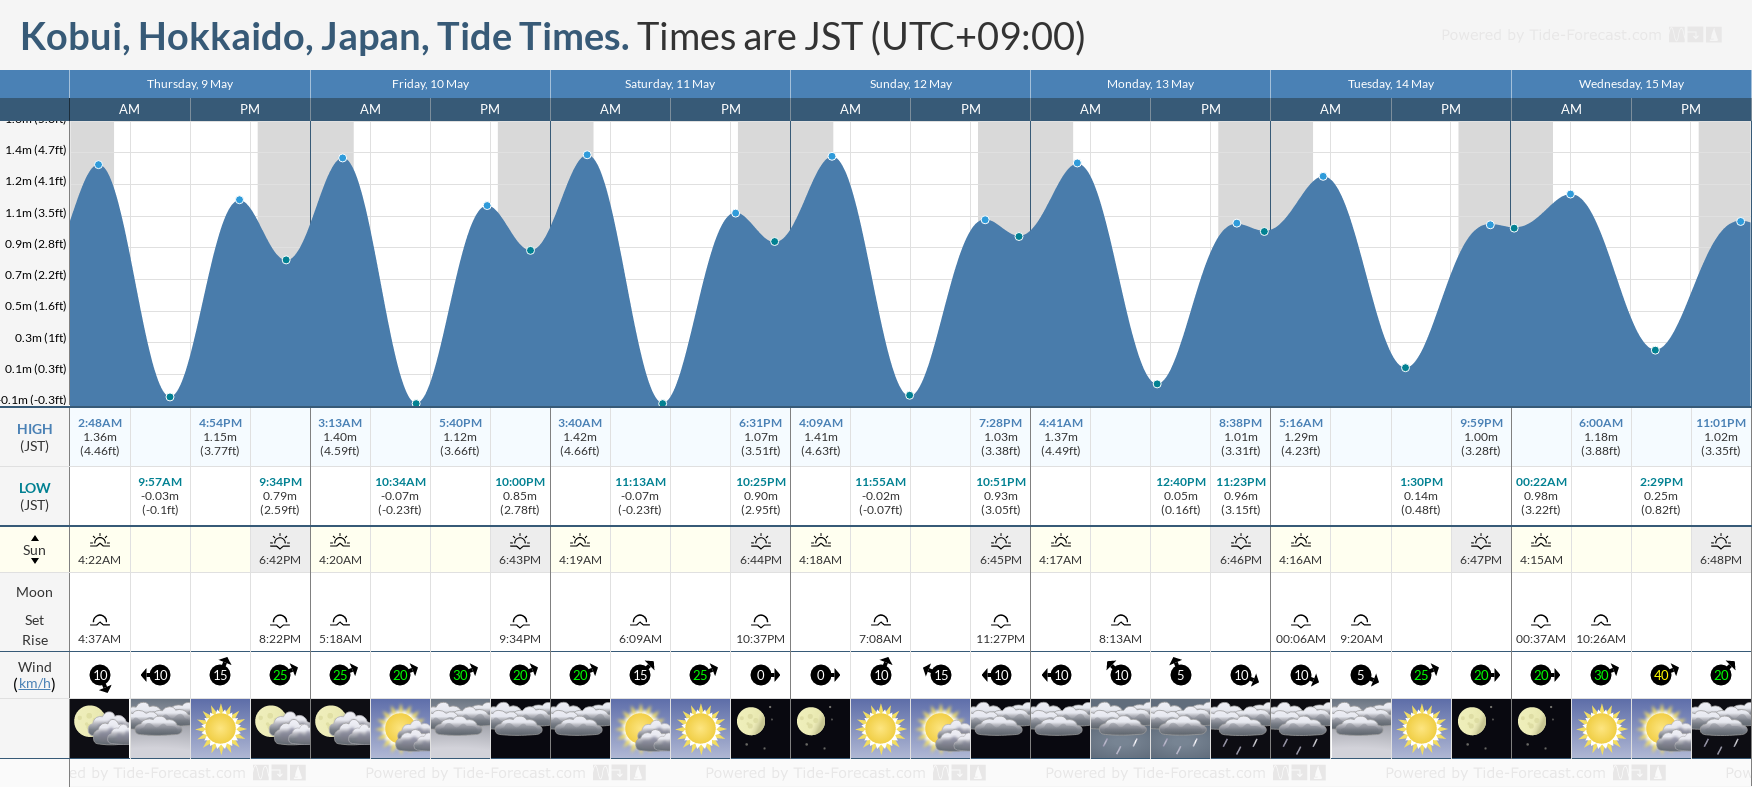 Kobui, Hokkaido, Japan Tide Chart including high and low tide times for the next 7 days